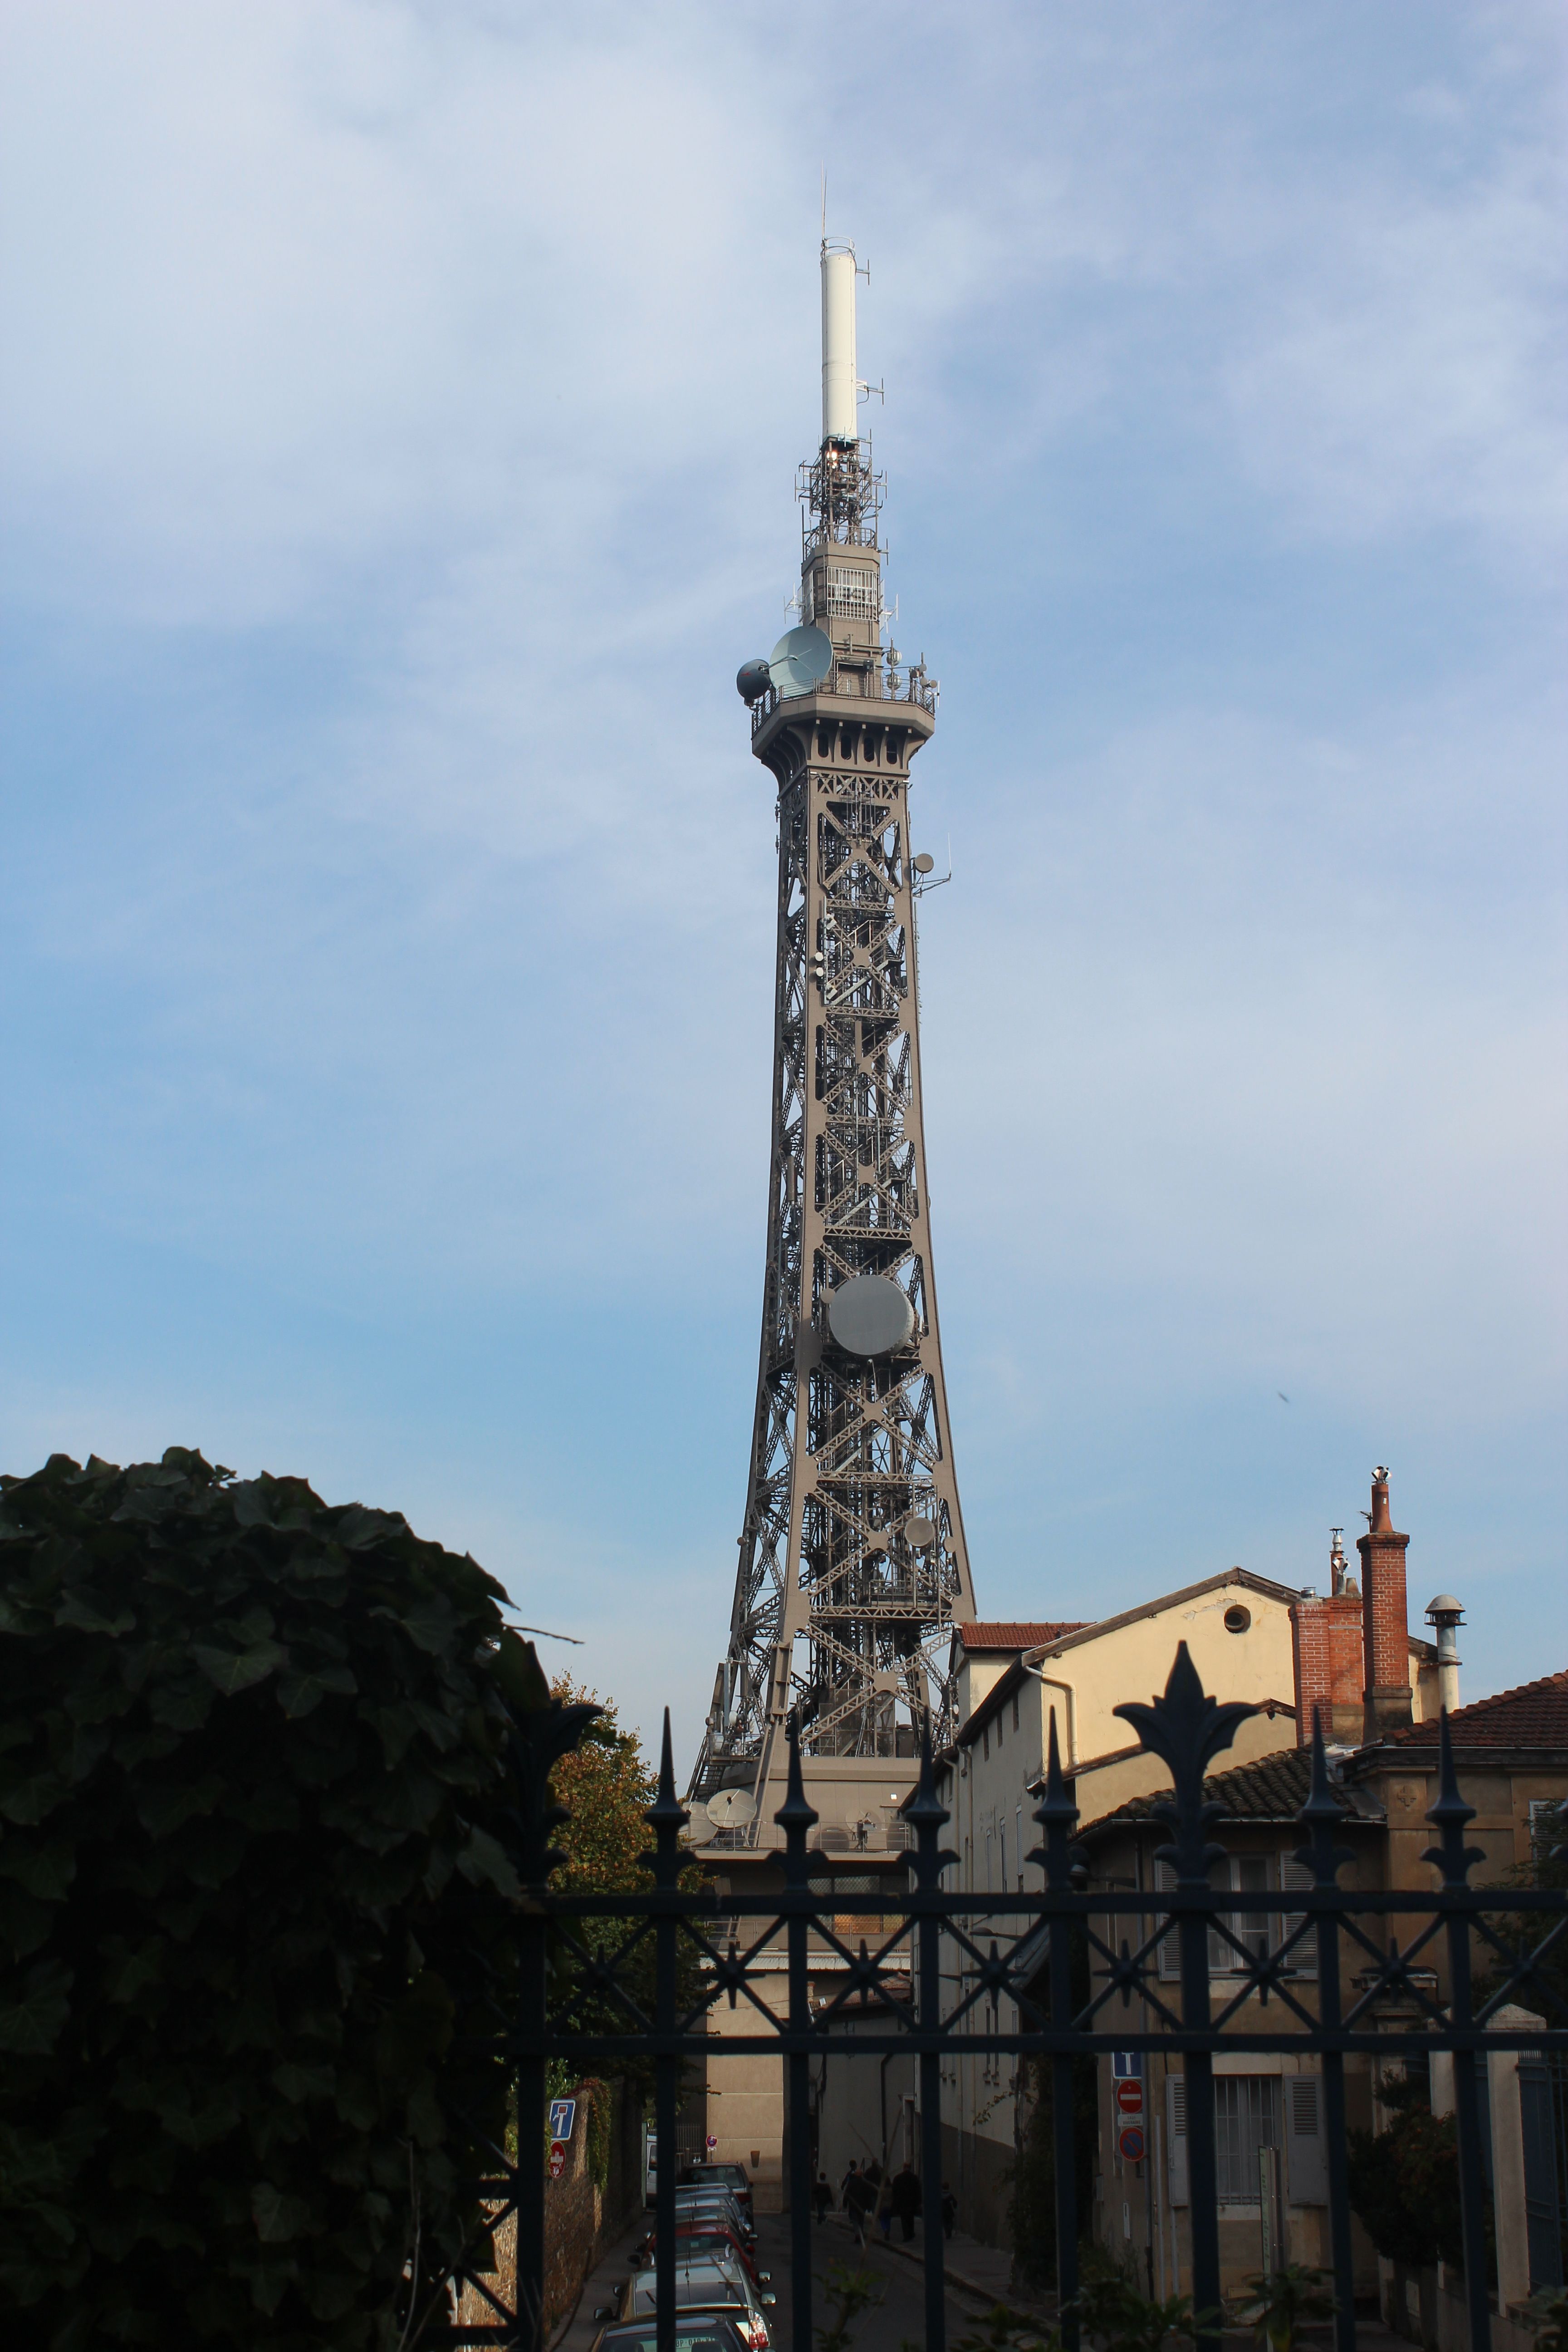 Tour Metallique, Lyon. An Industrial-style tower, built in 1894 for ...